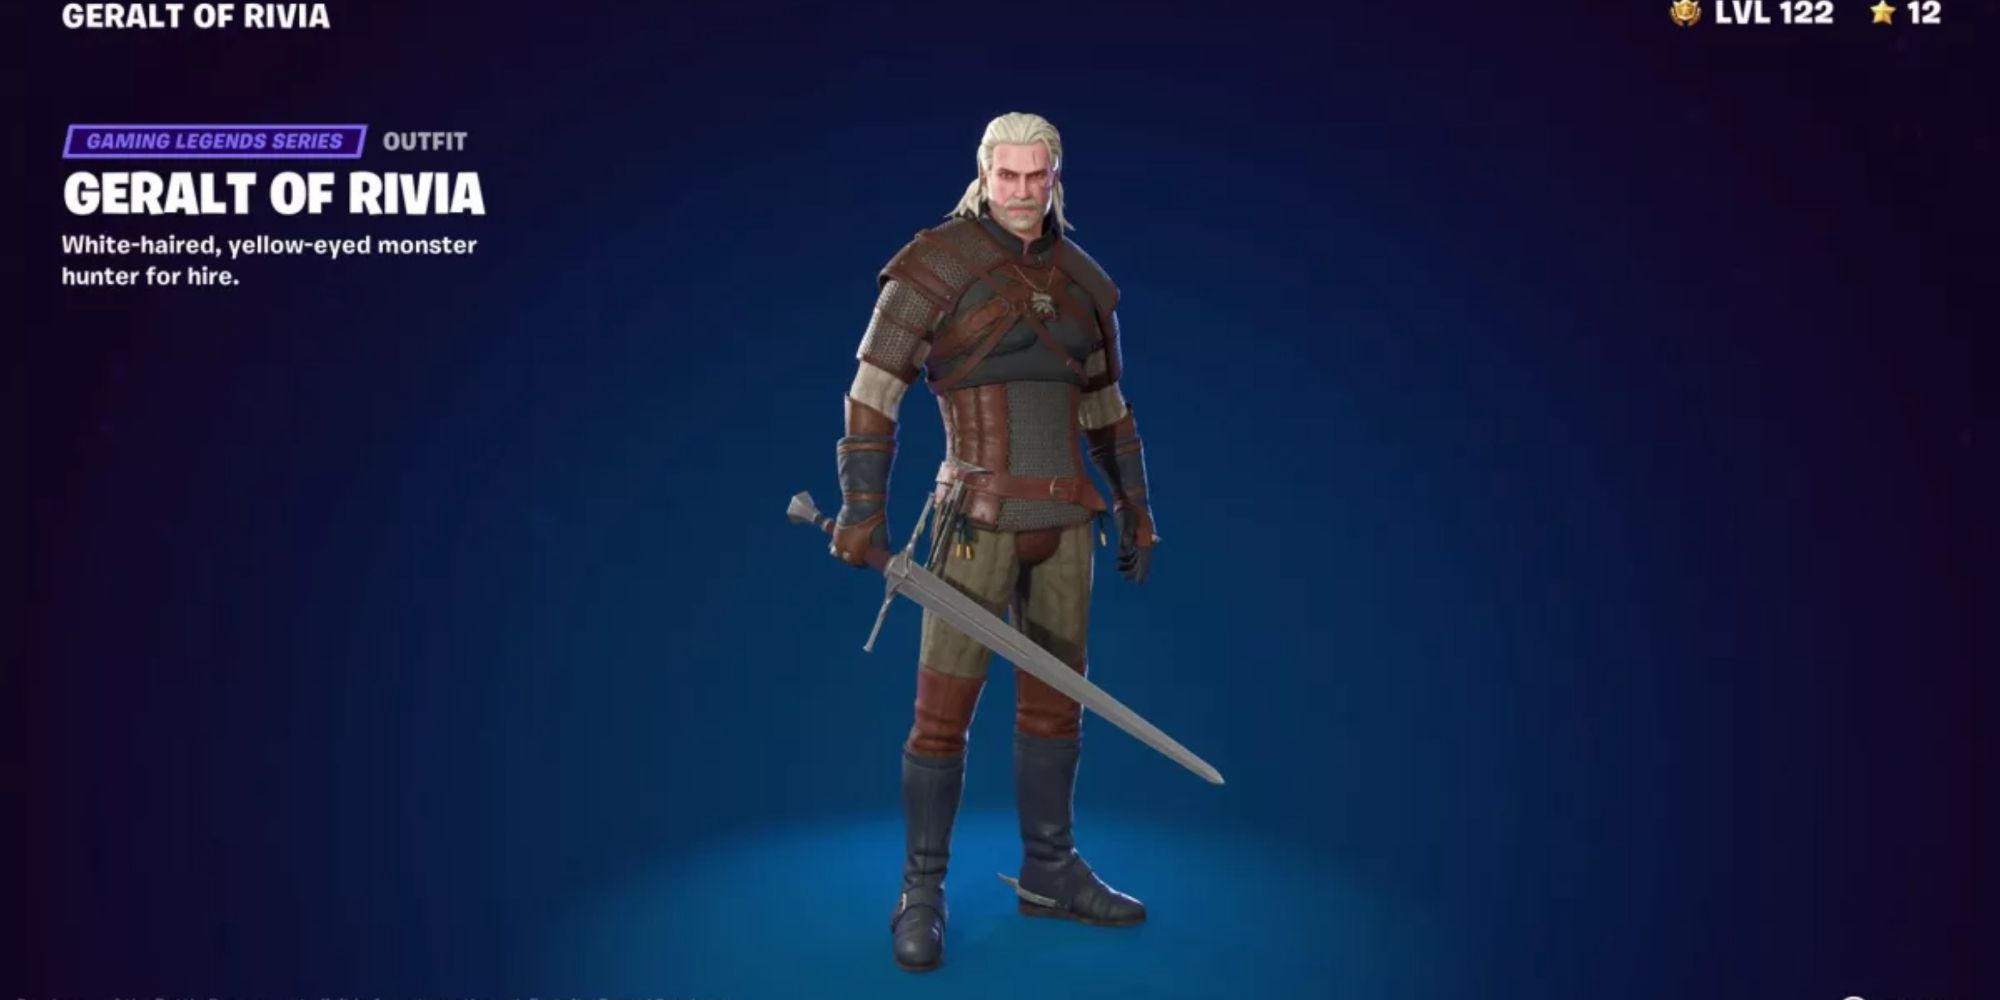 Geralt the Witcher in Fortnite